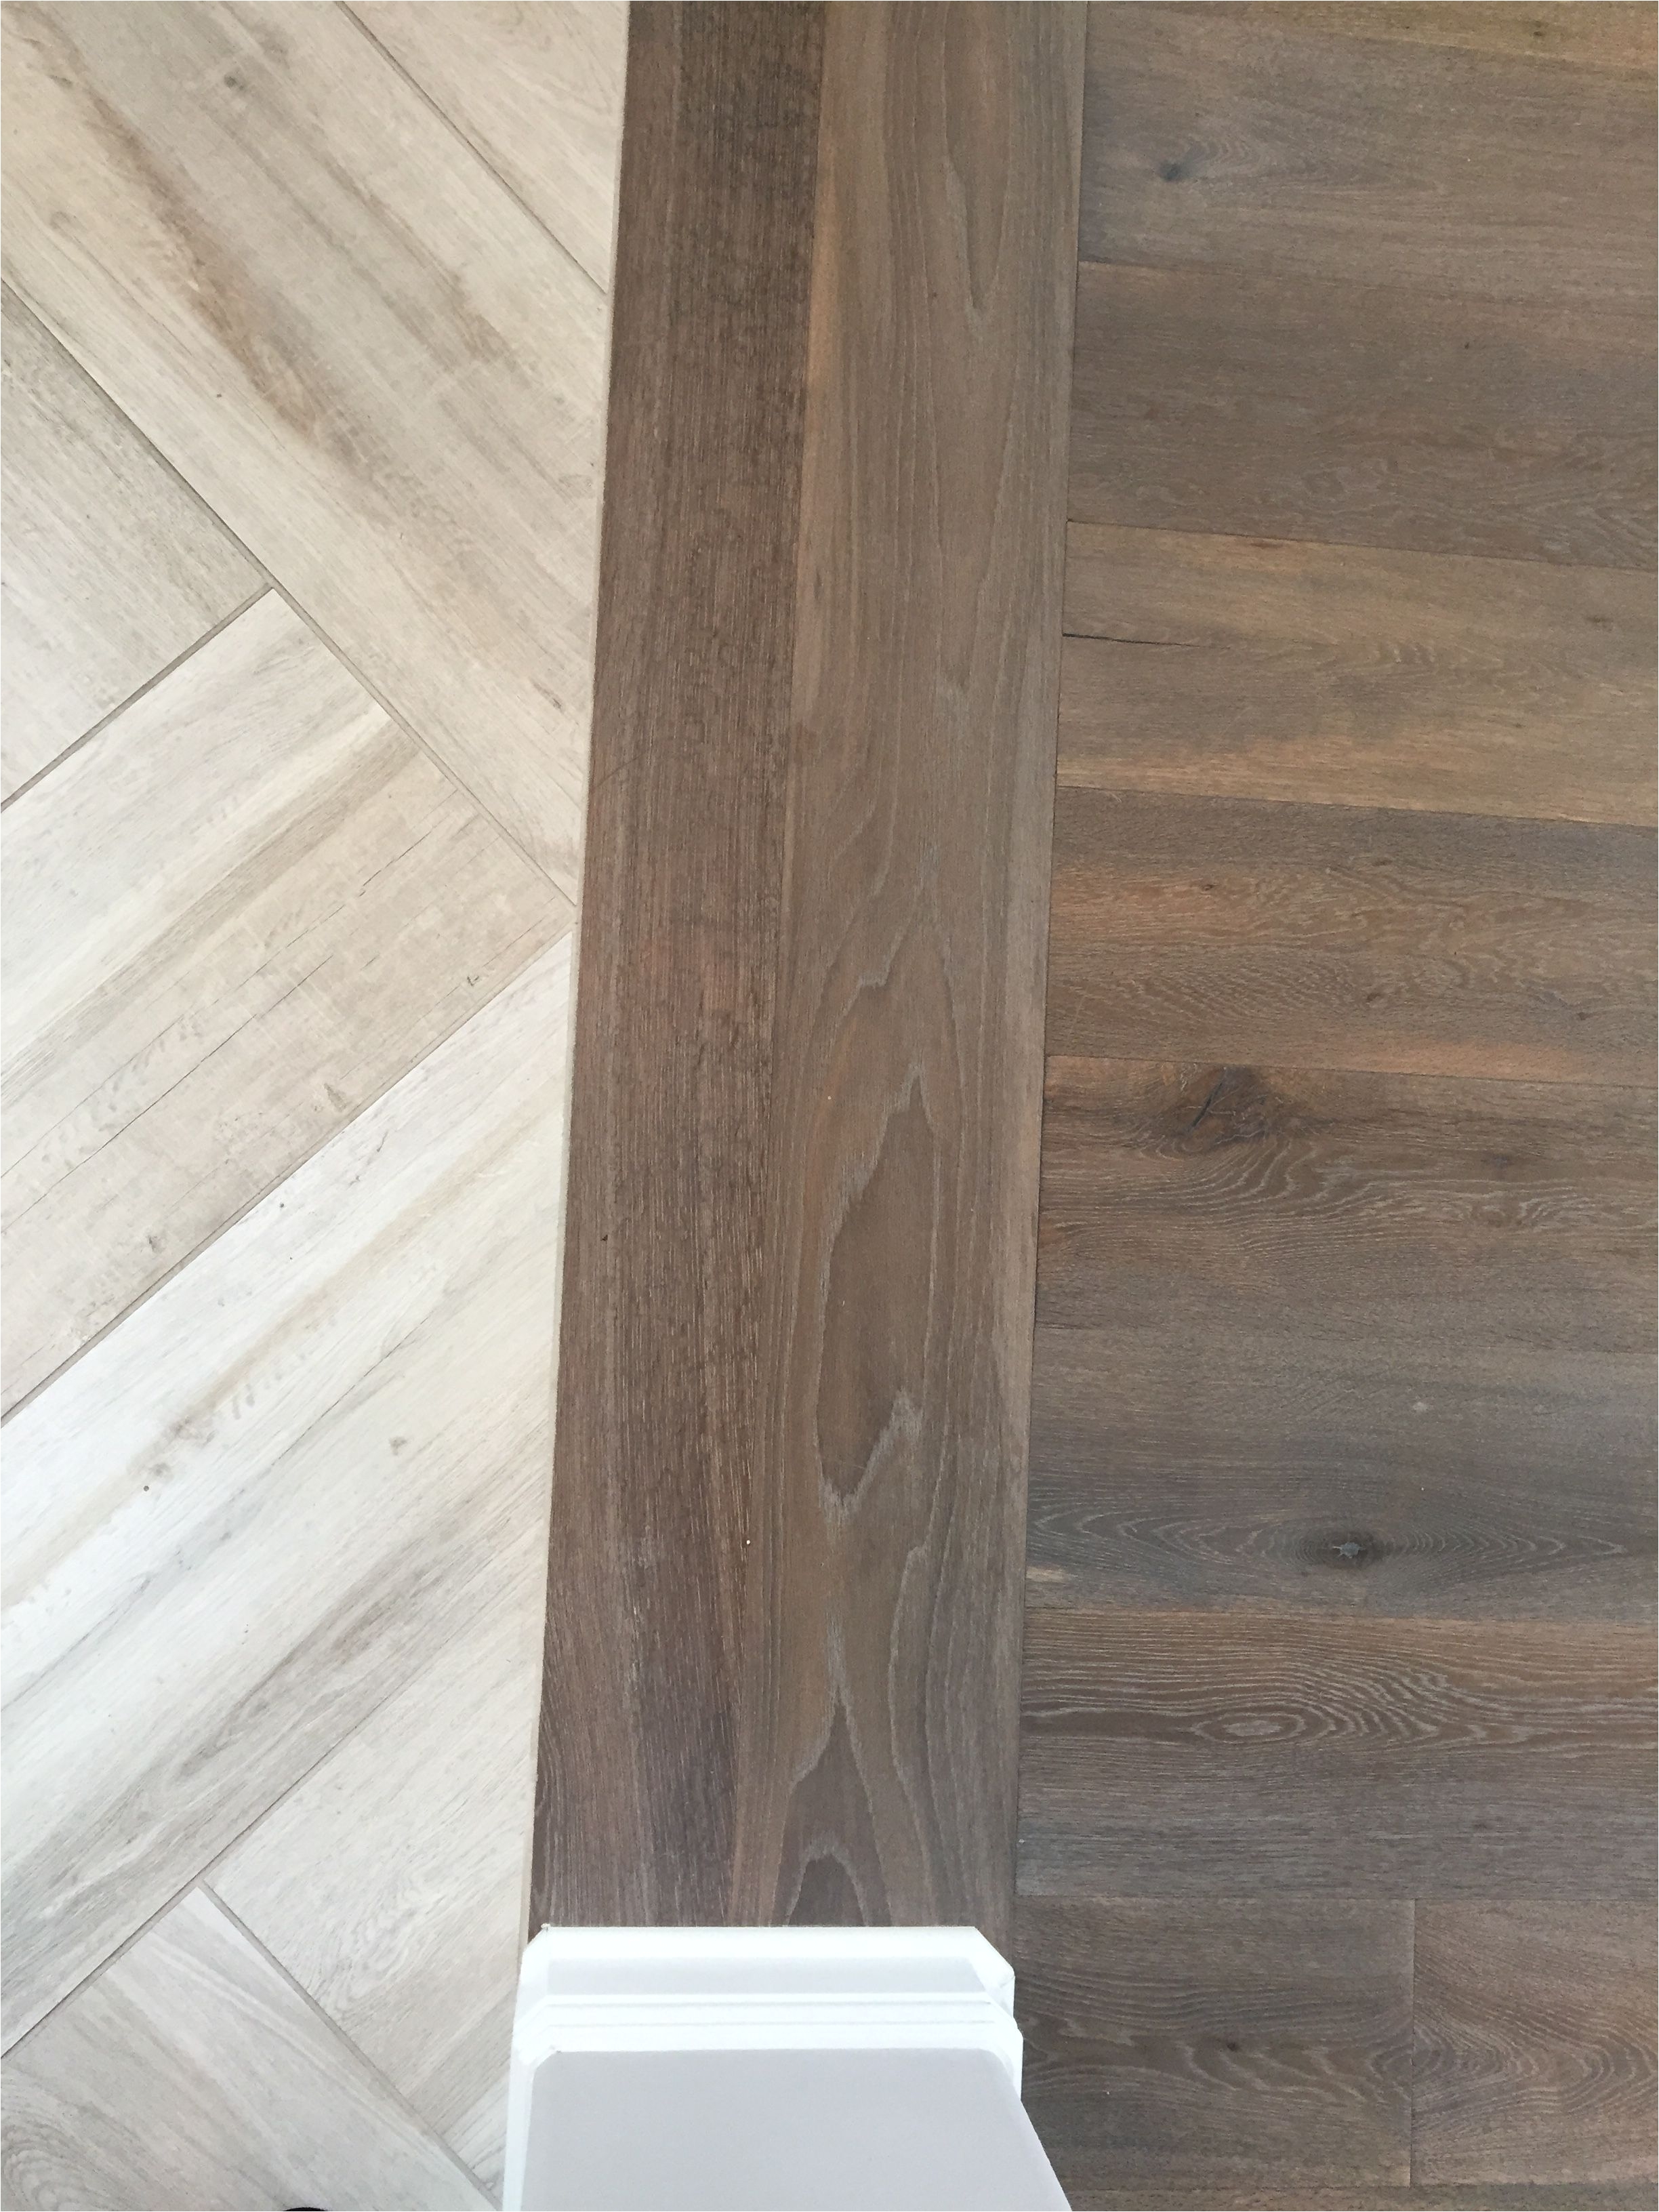 Two Different Color Wood Floors Floor Transition Laminate to Herringbone Tile Pattern Model